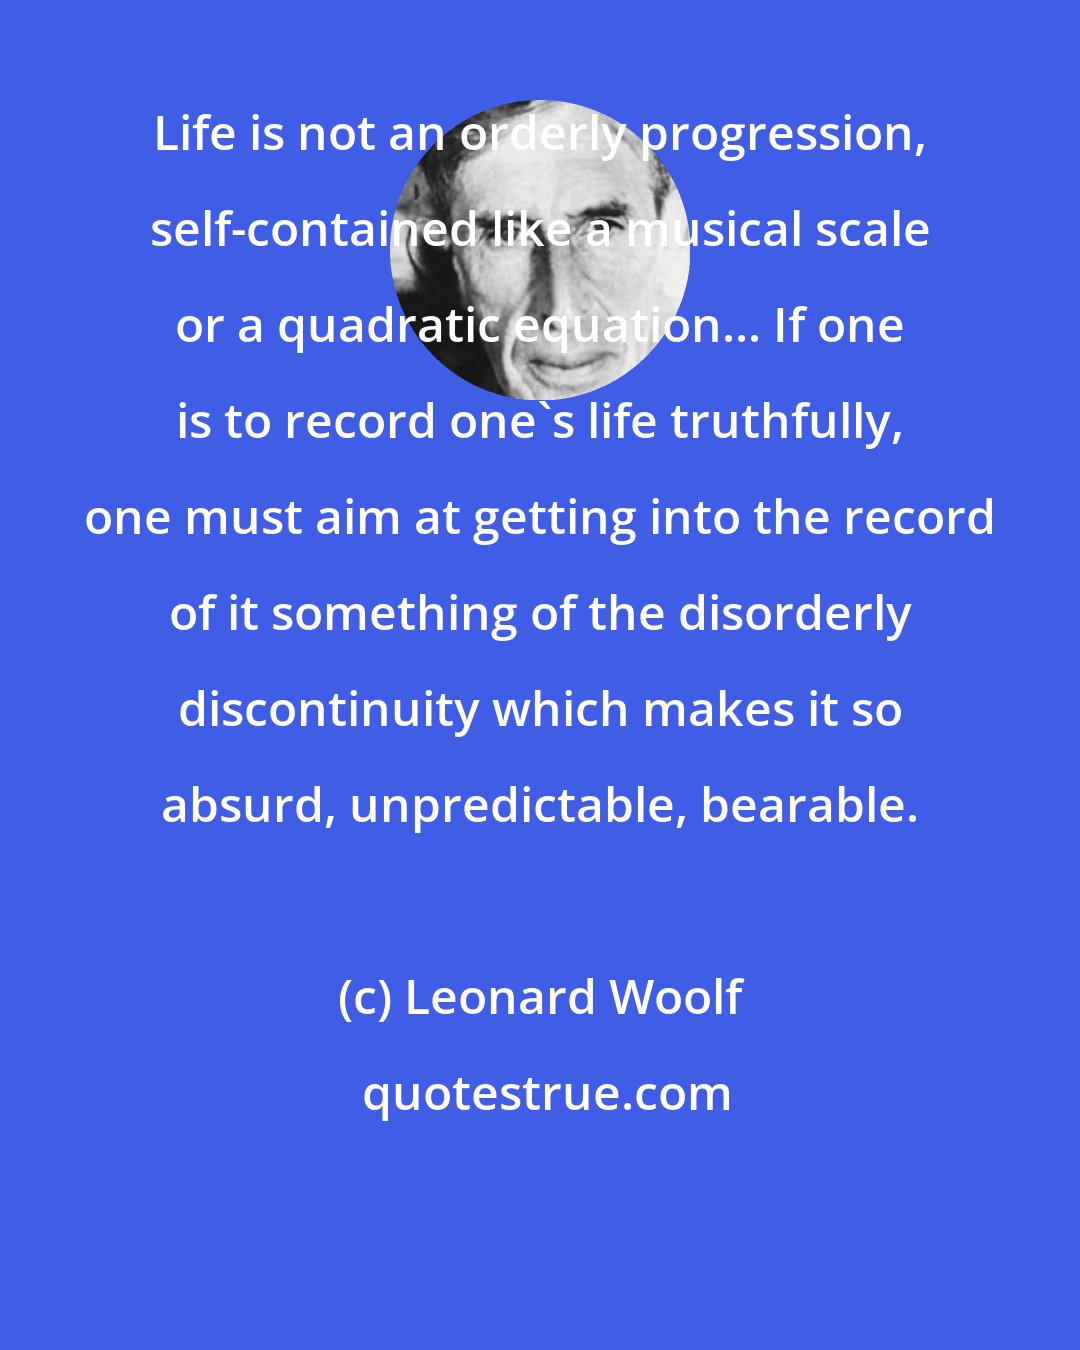 Leonard Woolf: Life is not an orderly progression, self-contained like a musical scale or a quadratic equation... If one is to record one's life truthfully, one must aim at getting into the record of it something of the disorderly discontinuity which makes it so absurd, unpredictable, bearable.